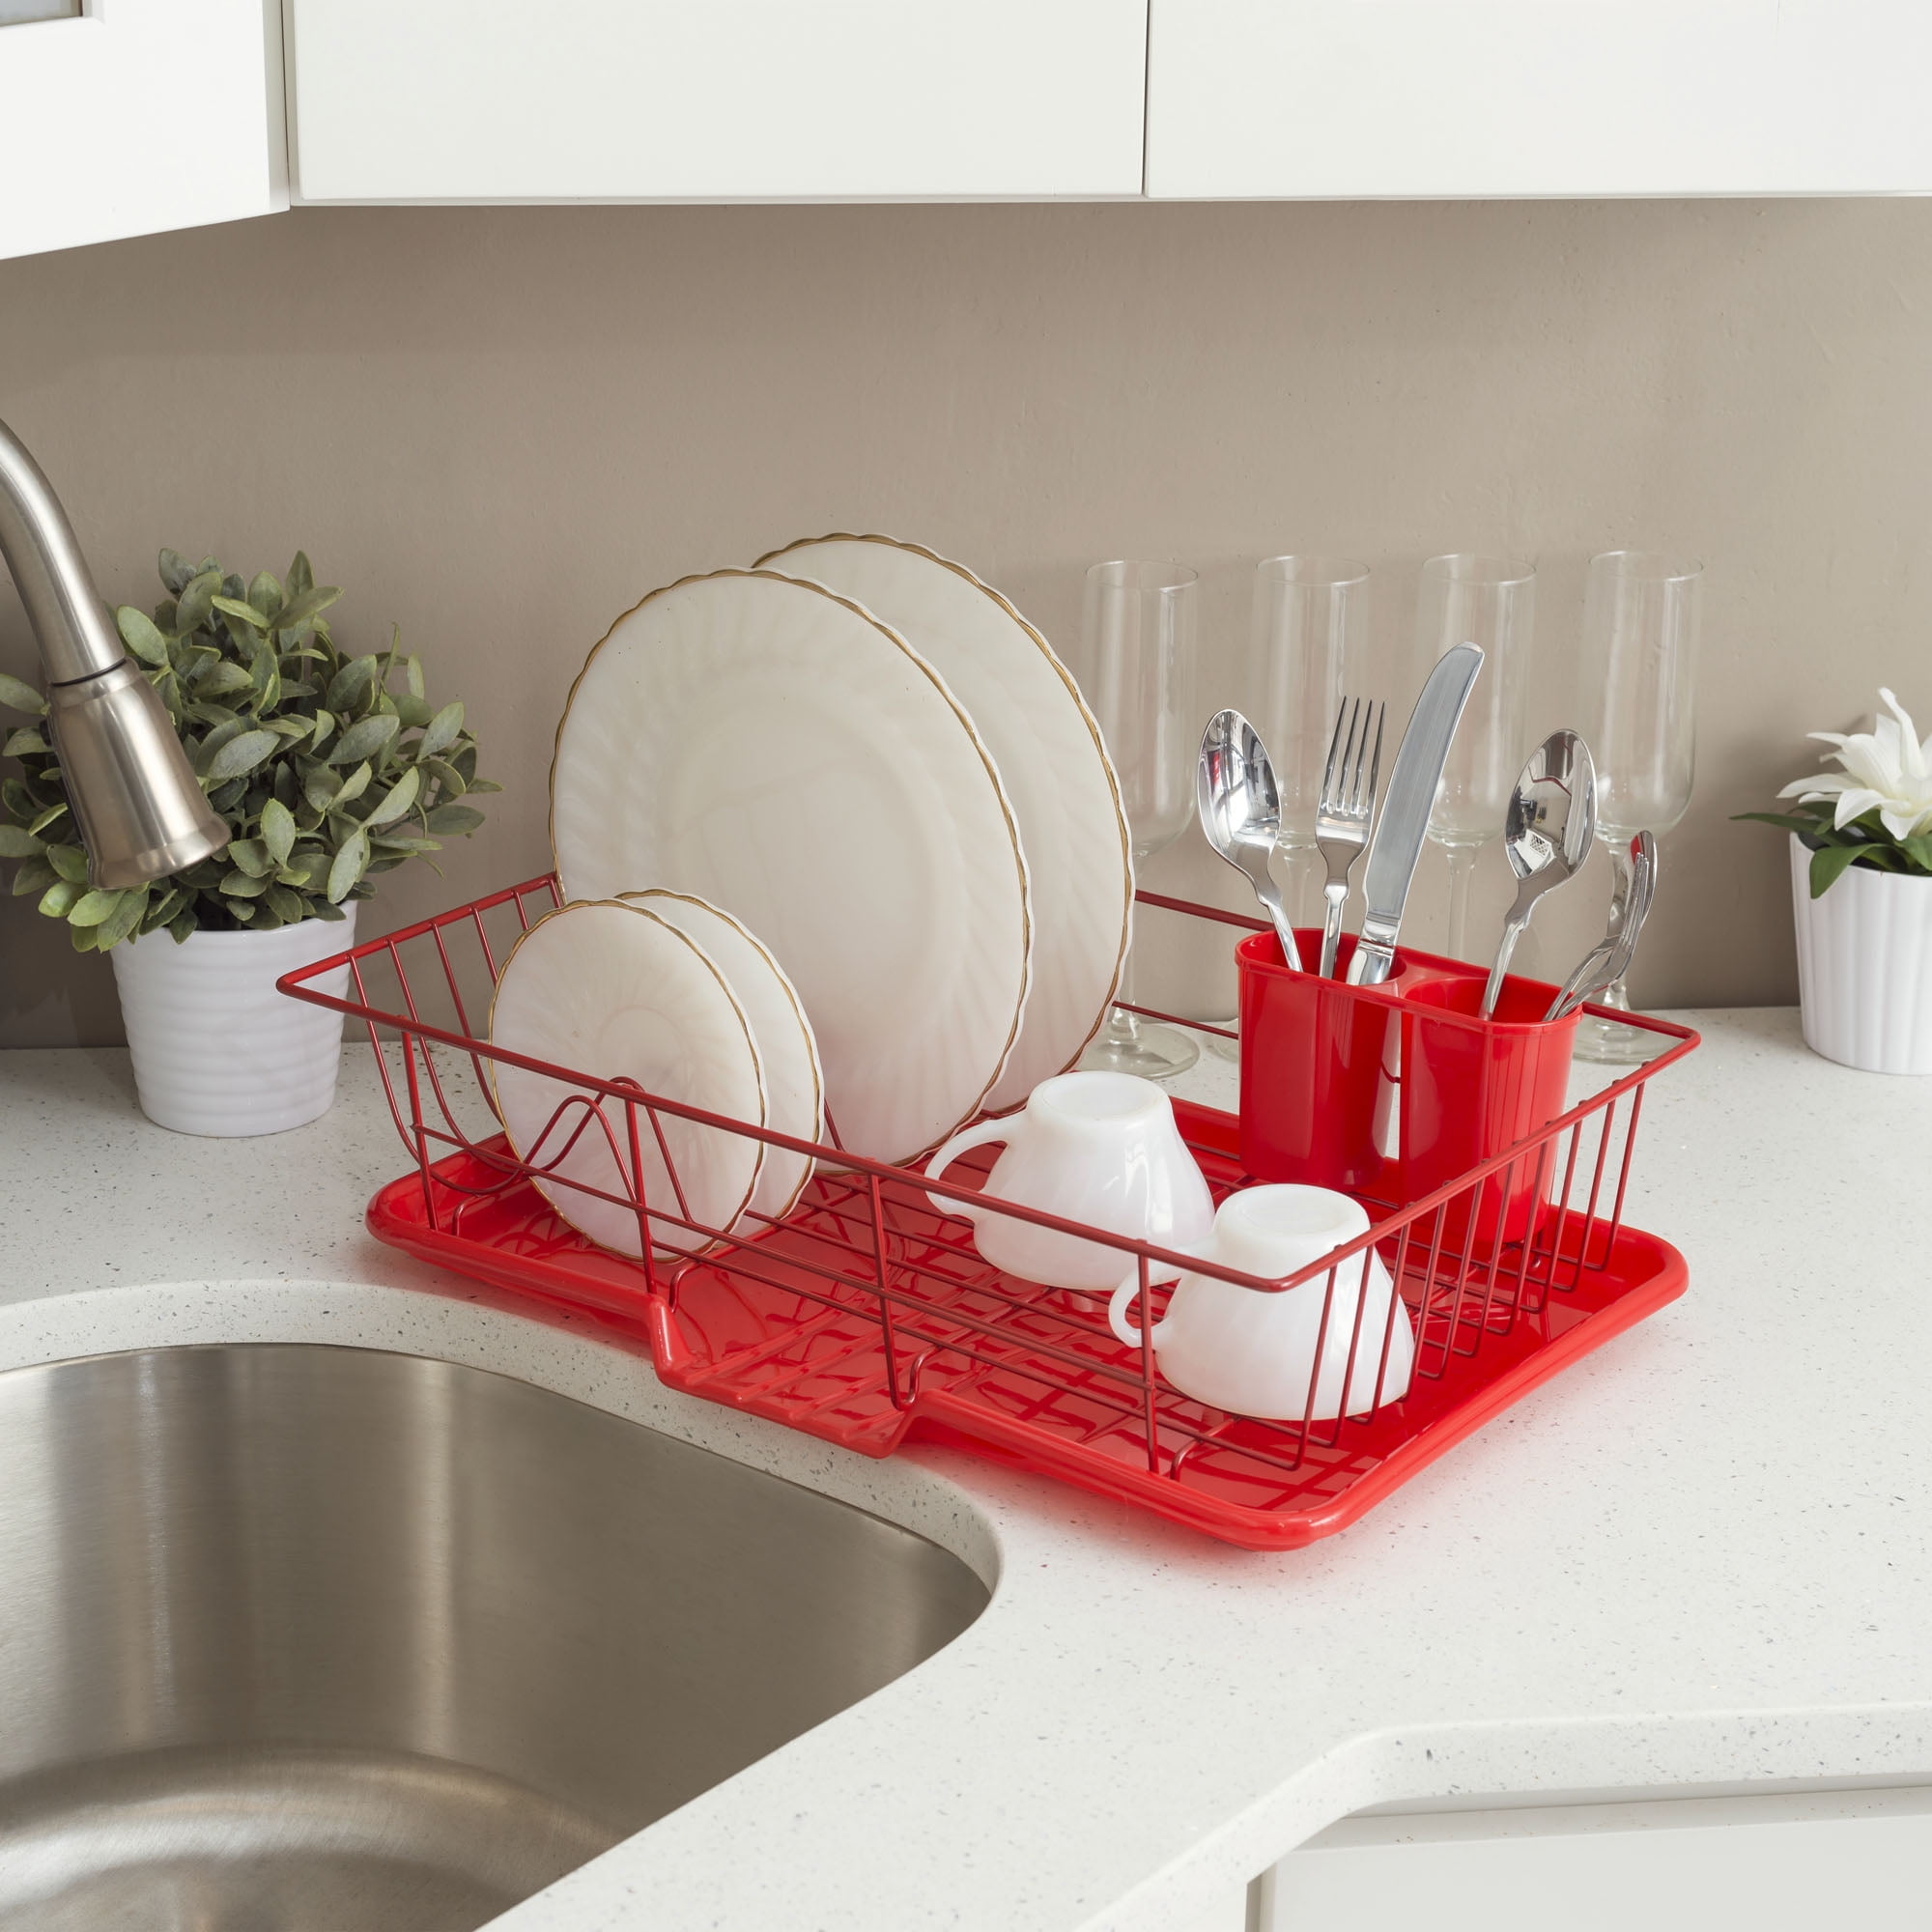 Home Basics 3 Piece Rust-Resistant Vinyl Dish Drainer with Self-Draining  Drip Tray, Red